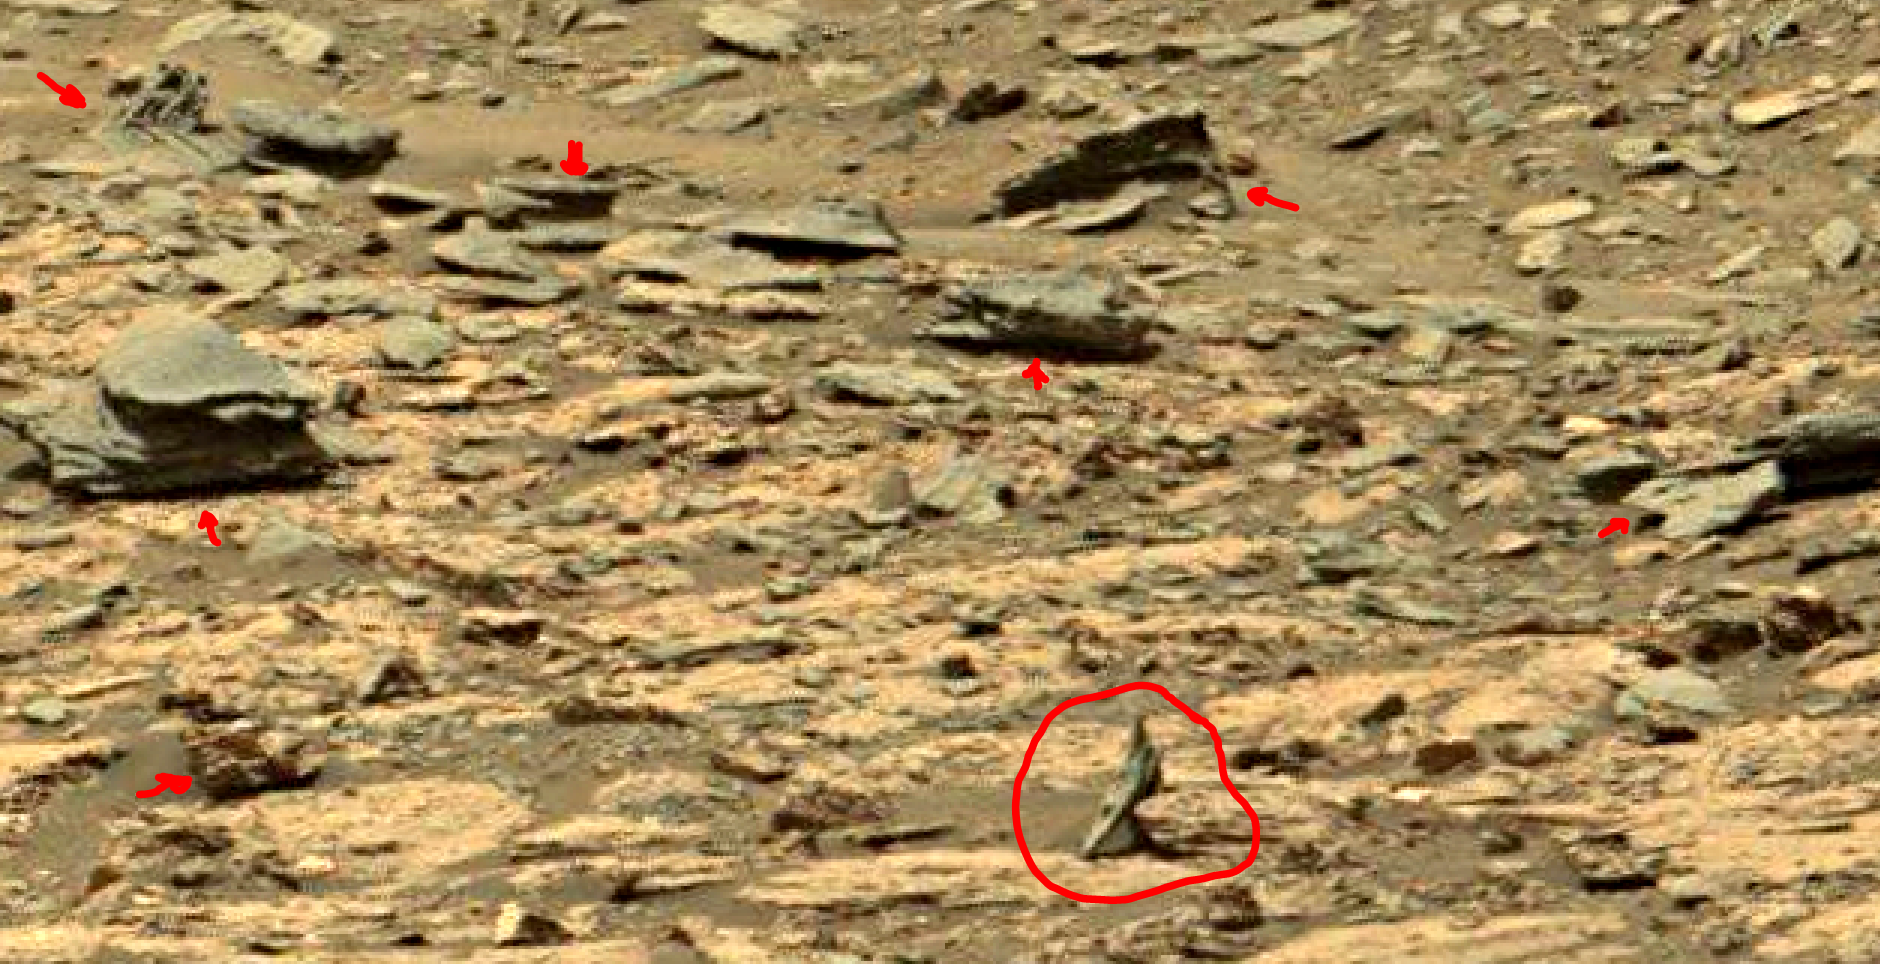 mars sol 1447 anomaly artifacts 12 - was life on mars